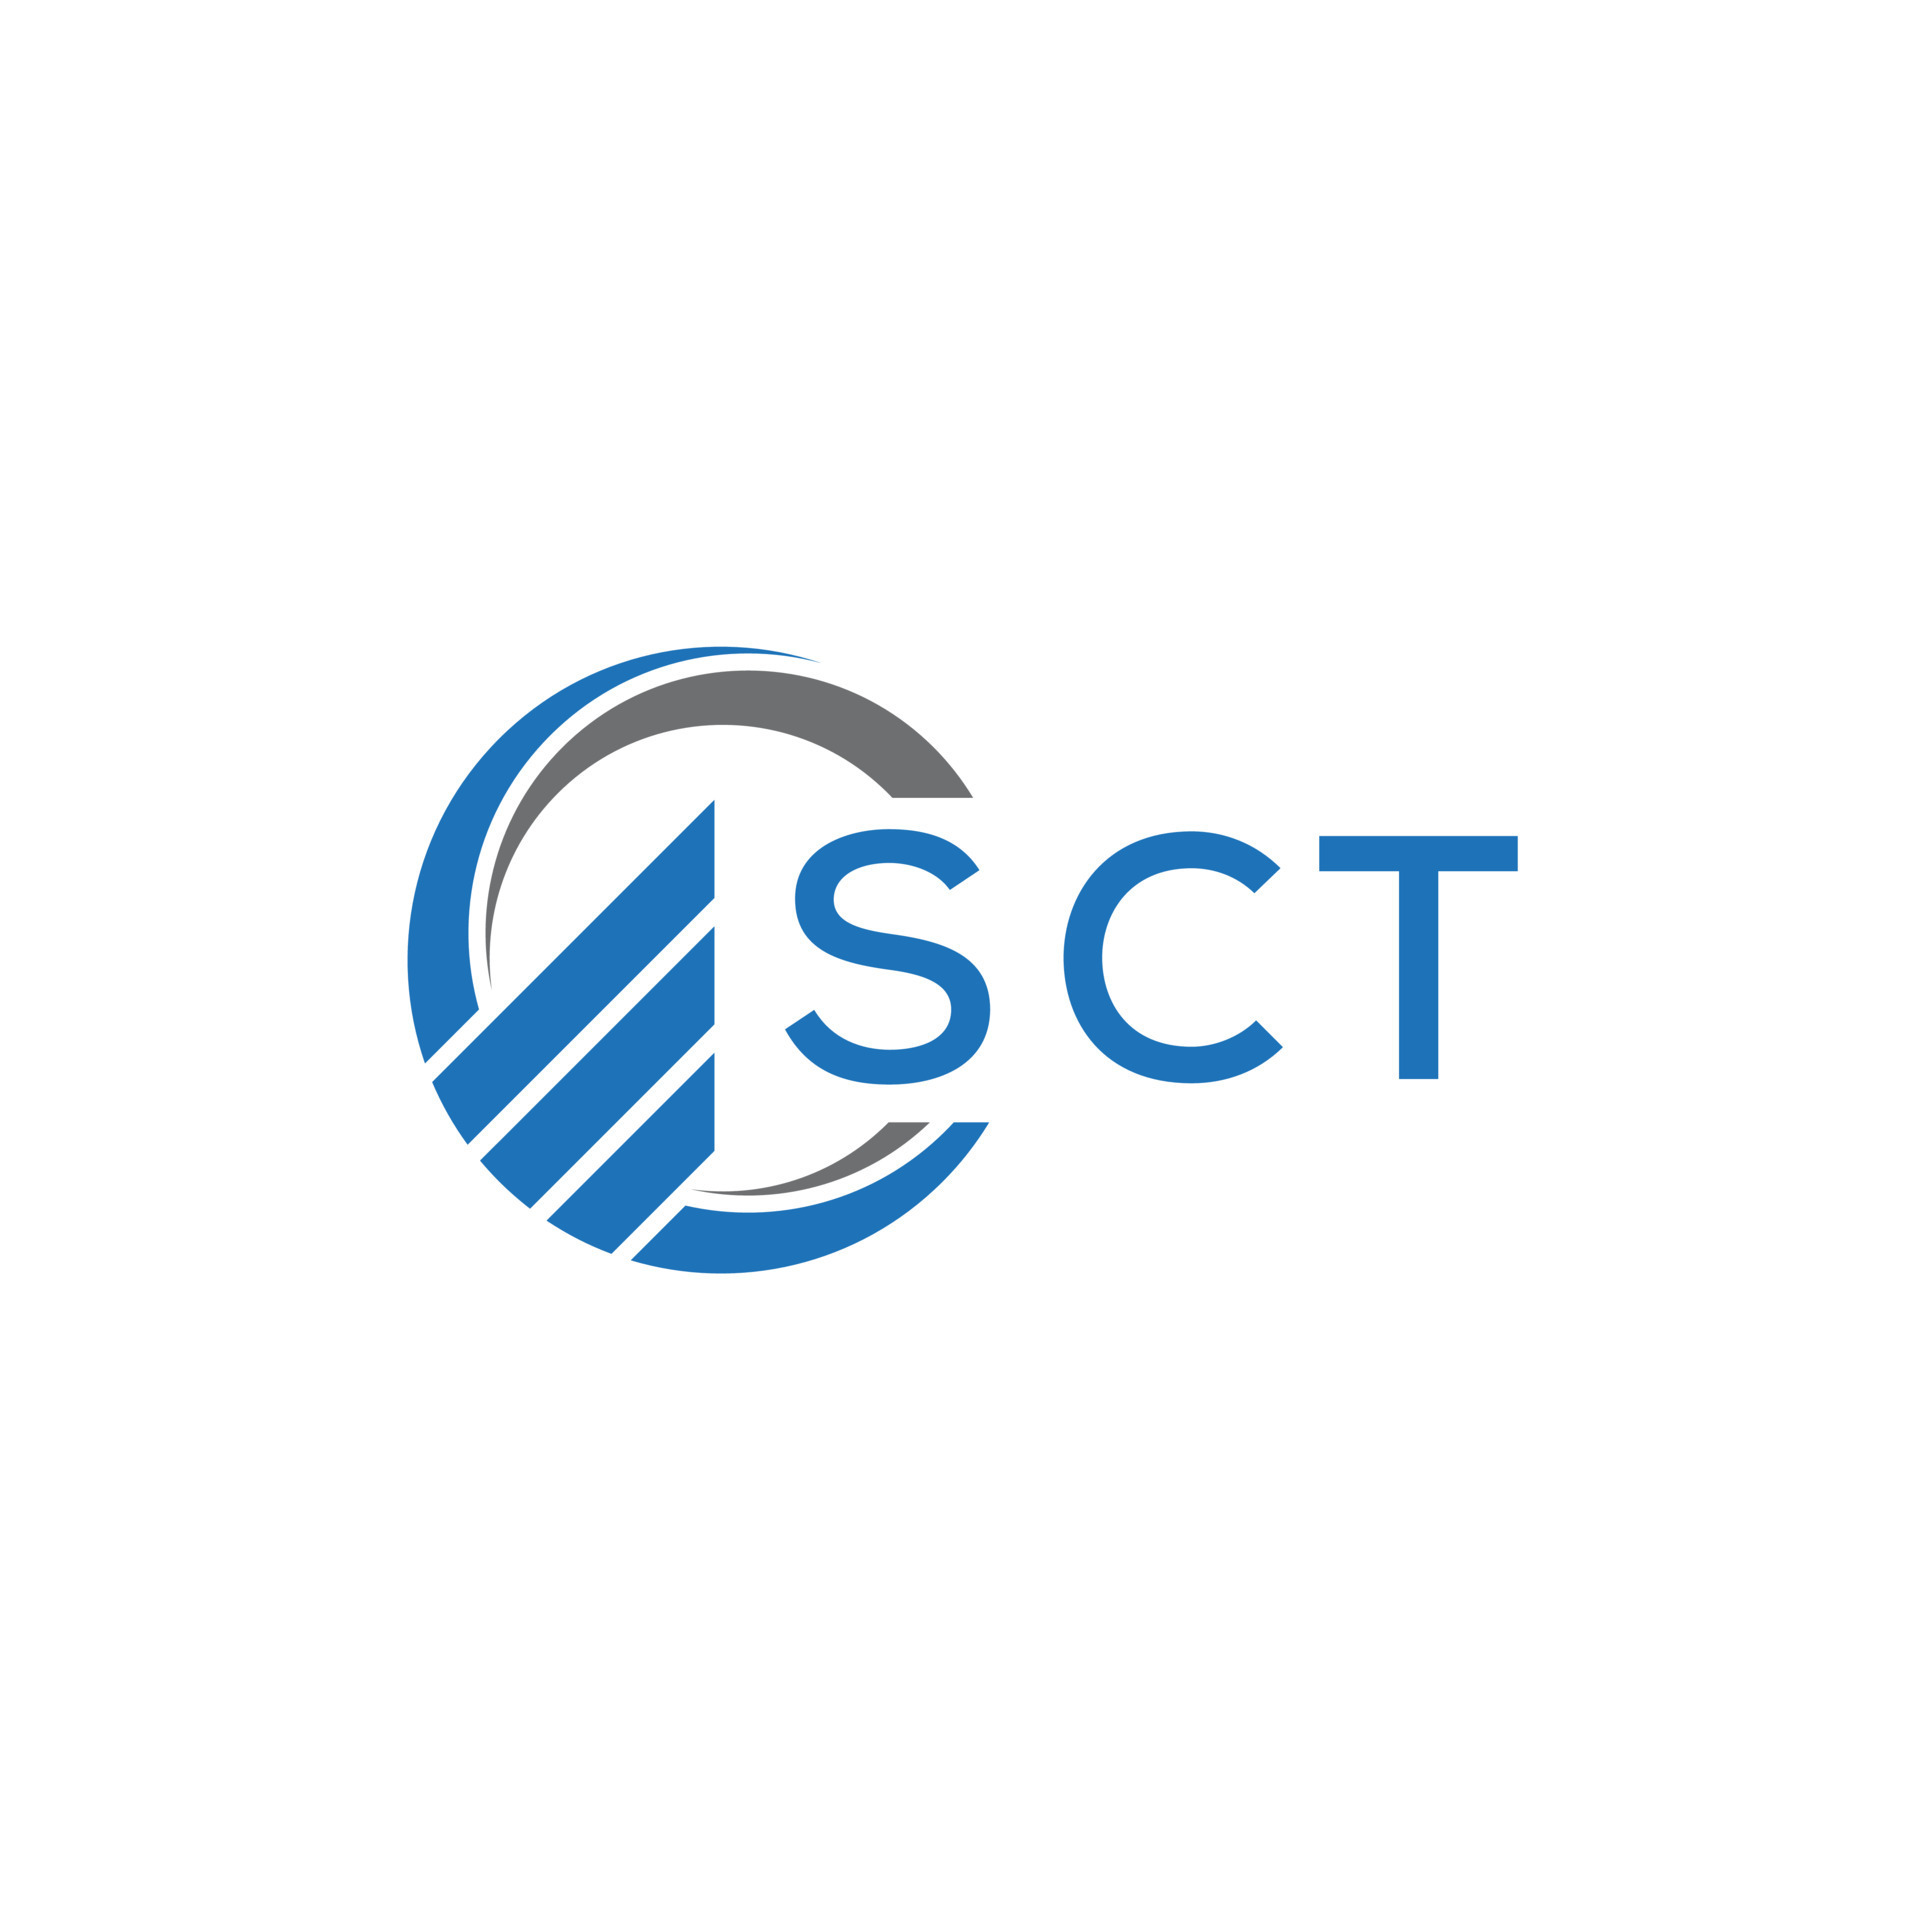 SCT - Systems And Computer Technology Corporation Trademark Registration